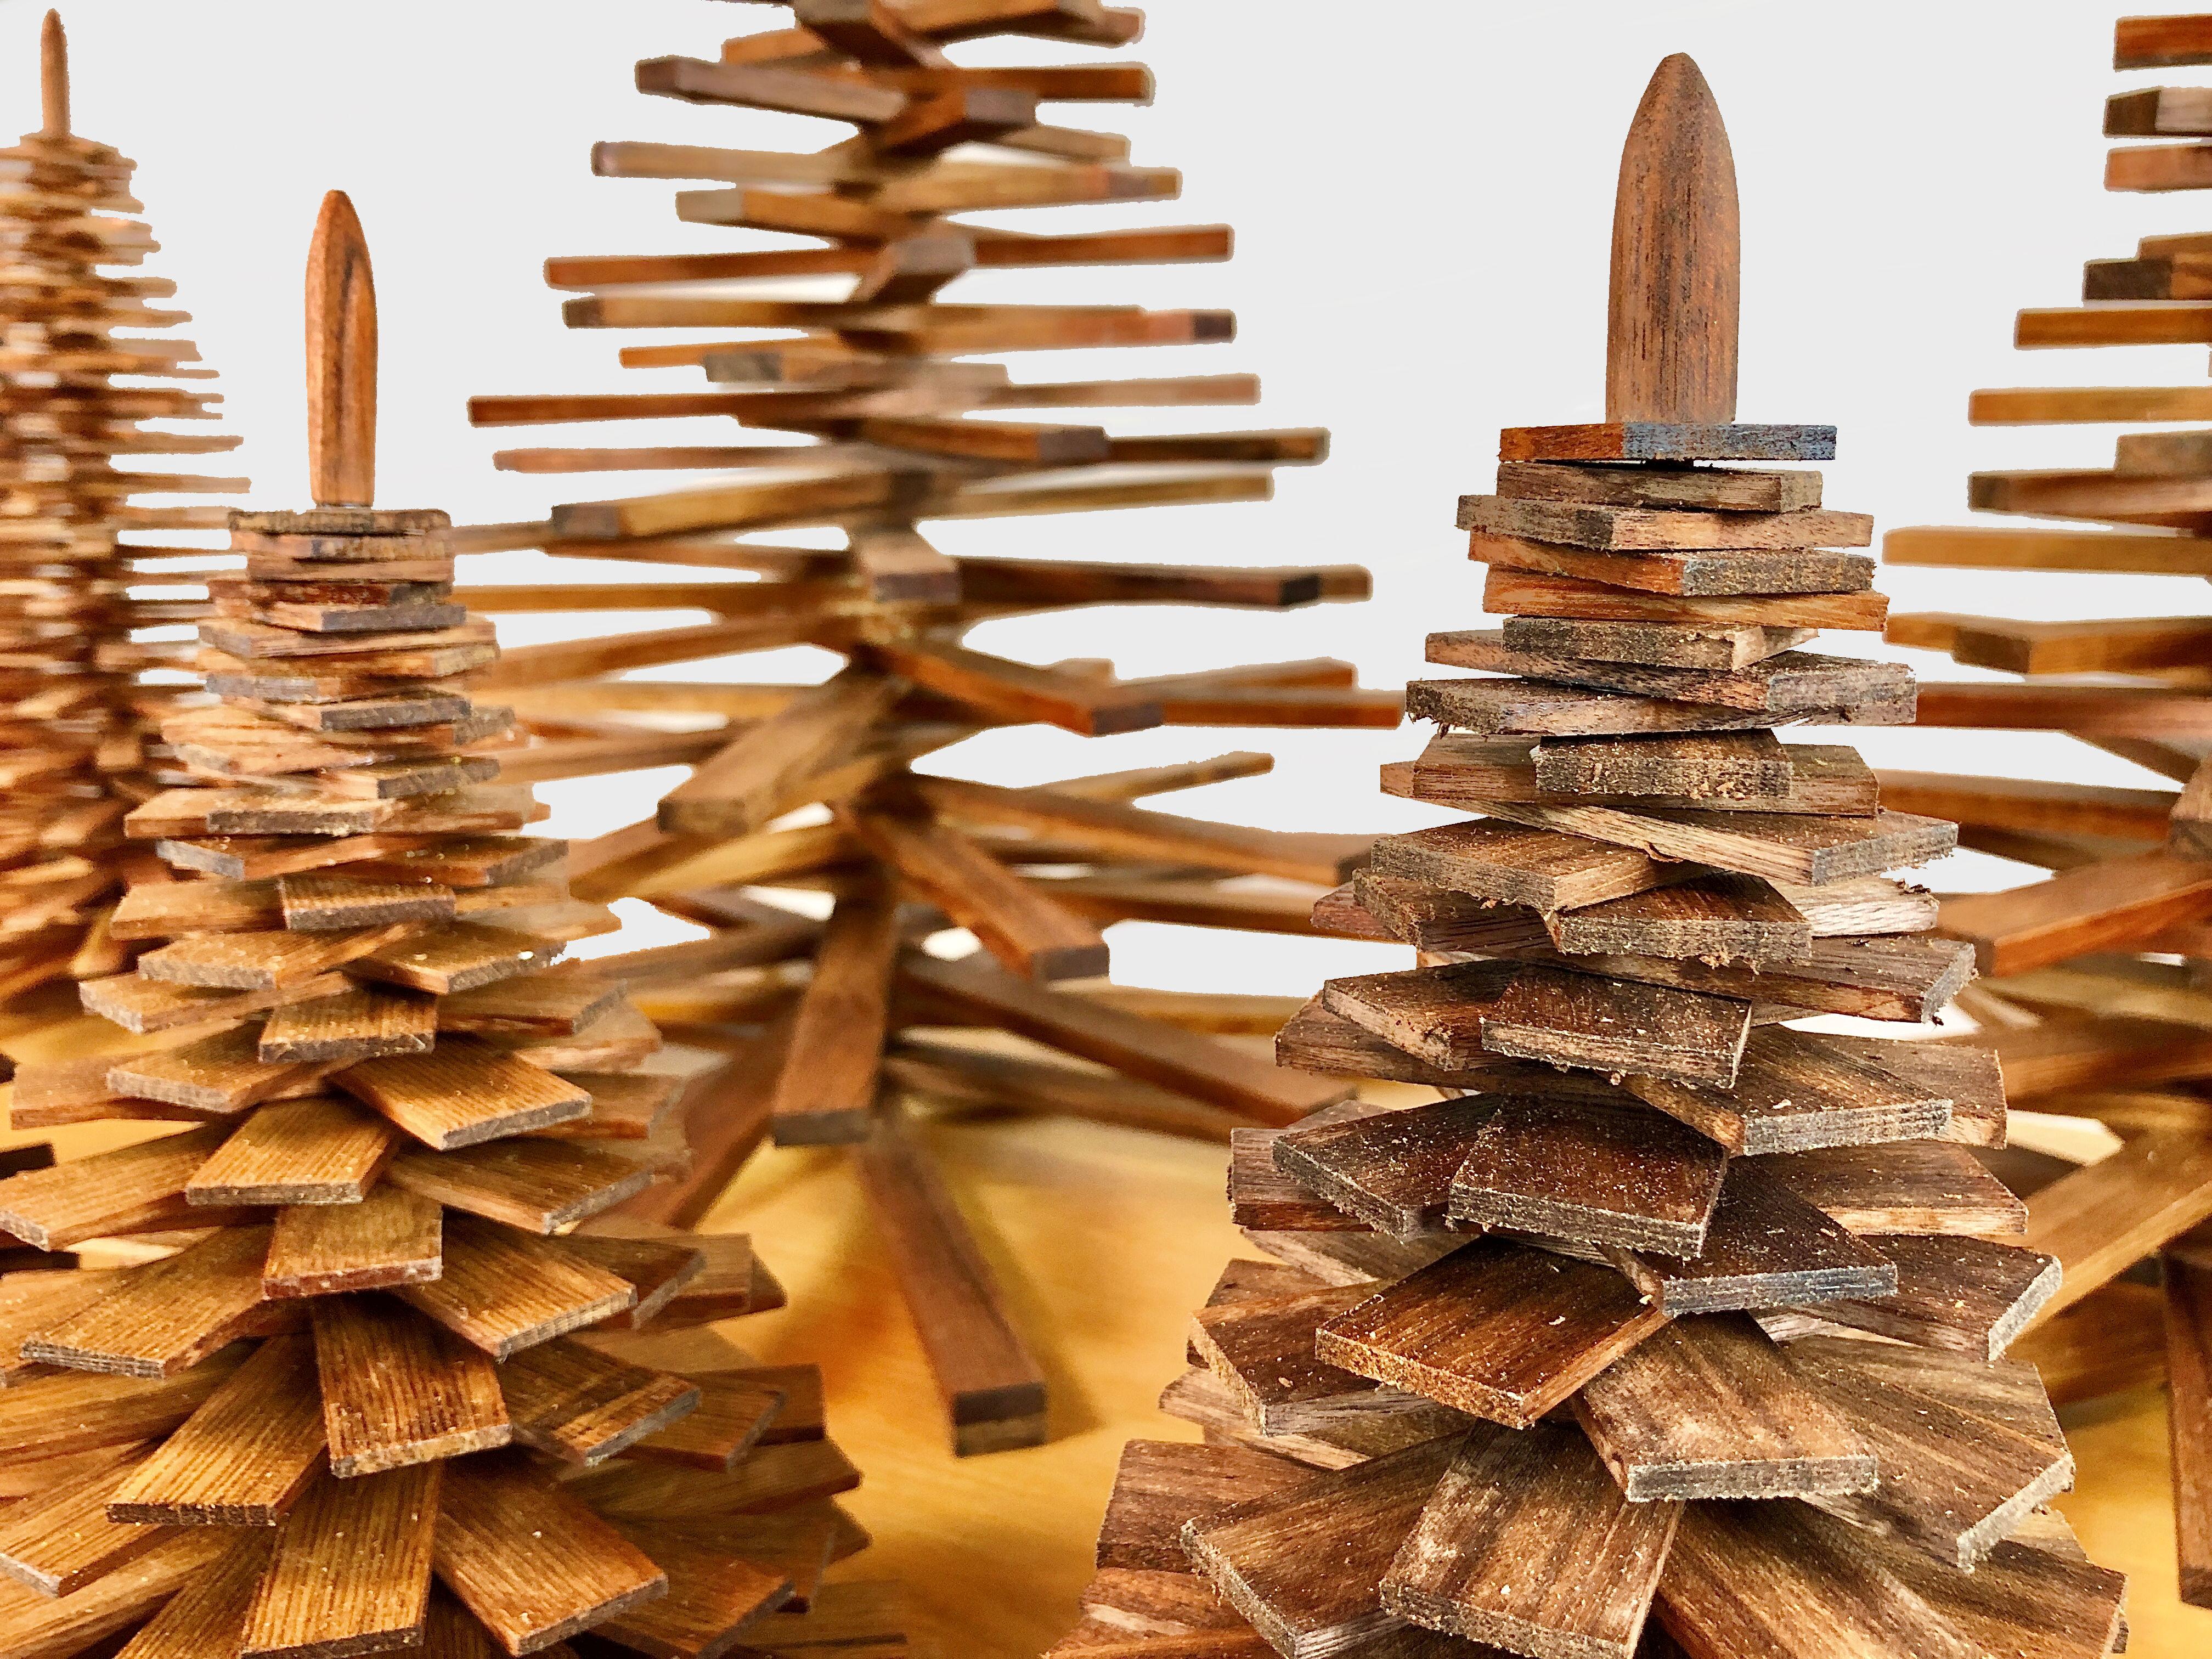 Hand-Crafted Decorative Handmade Wooden Christmas Trees